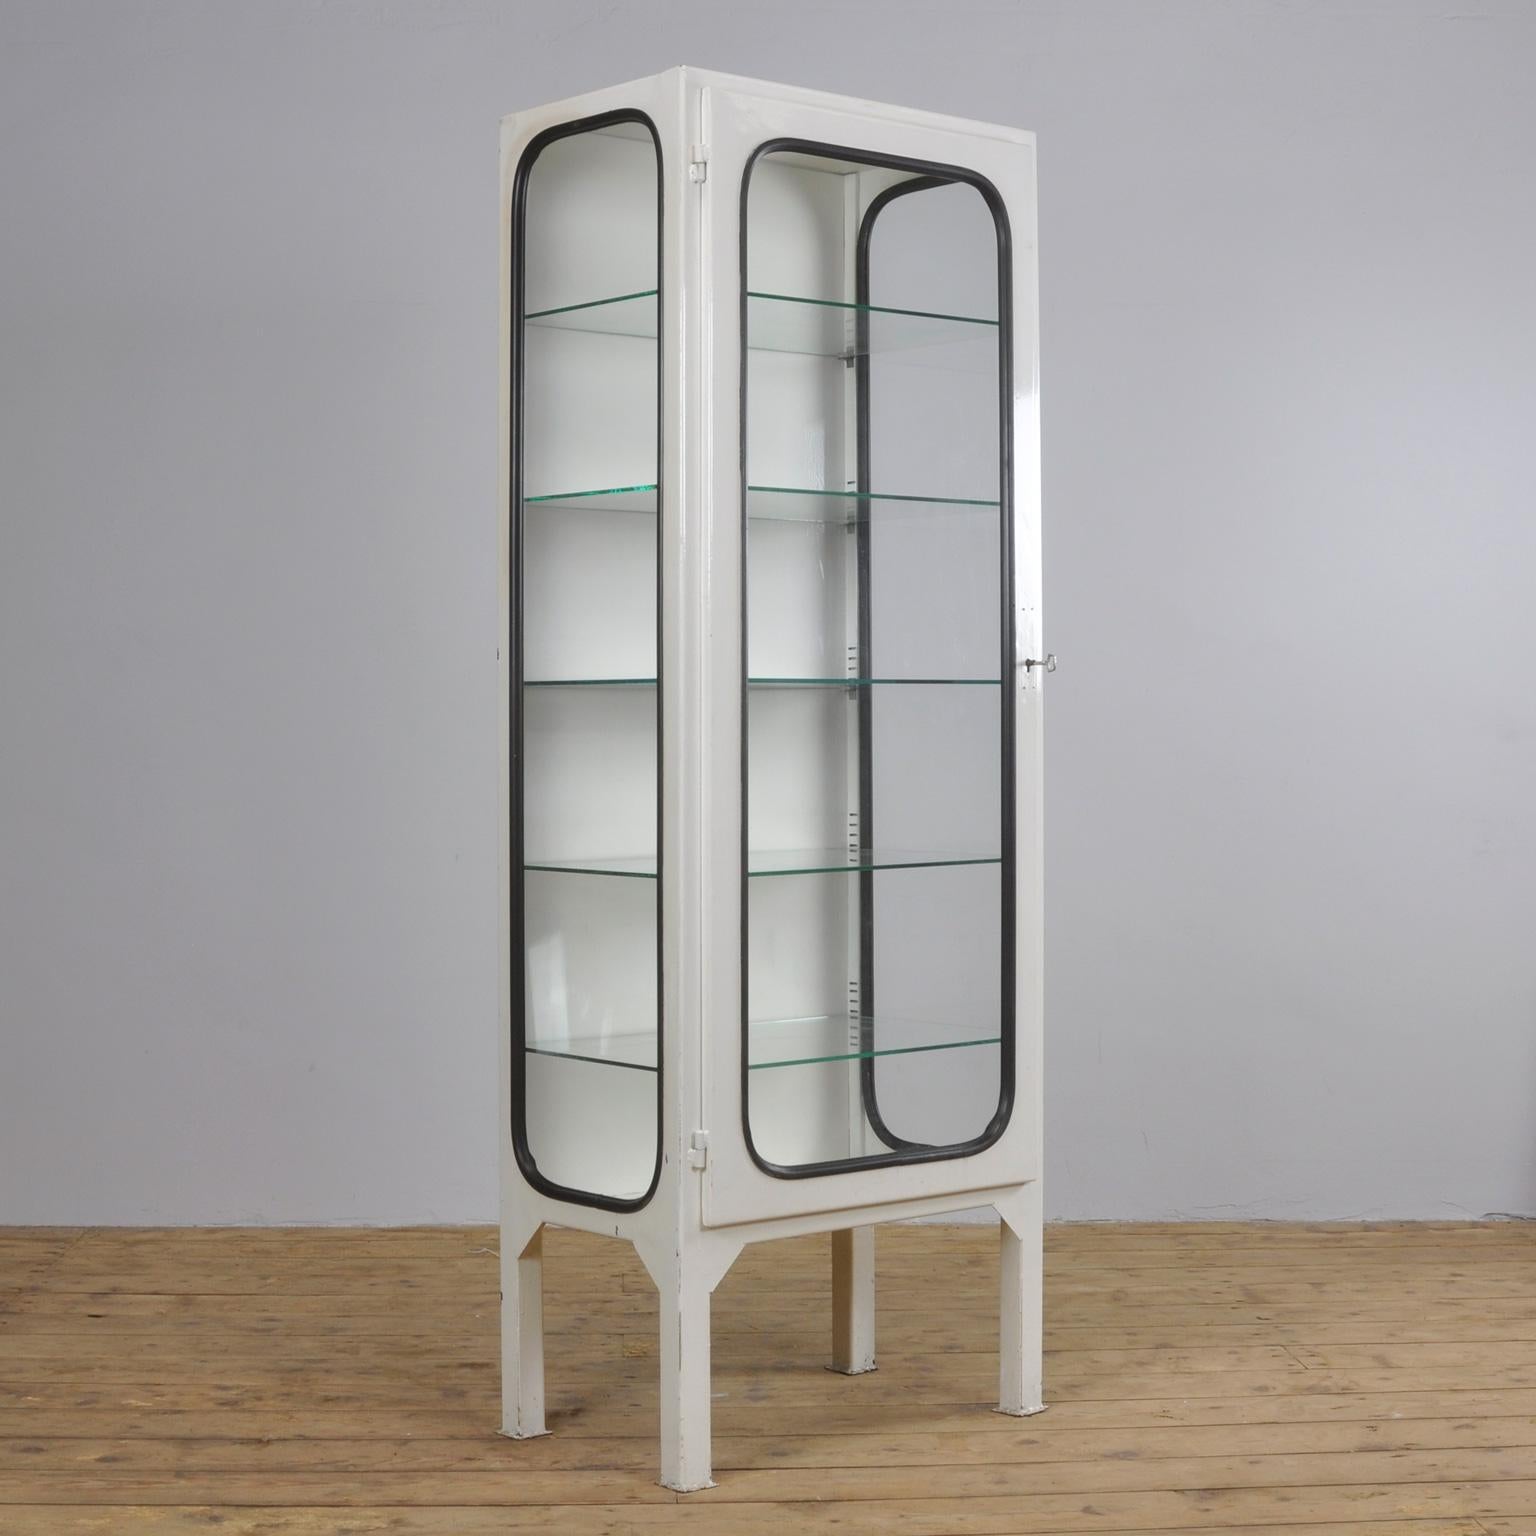 This medicine cabinet was designed in the 1970s and produced in 1975 in Hungary. It is made from steel and glass, with the glass panes held in place by a black rubber strip. The cabinet features five adjustable glass shelves and a functioning lock.